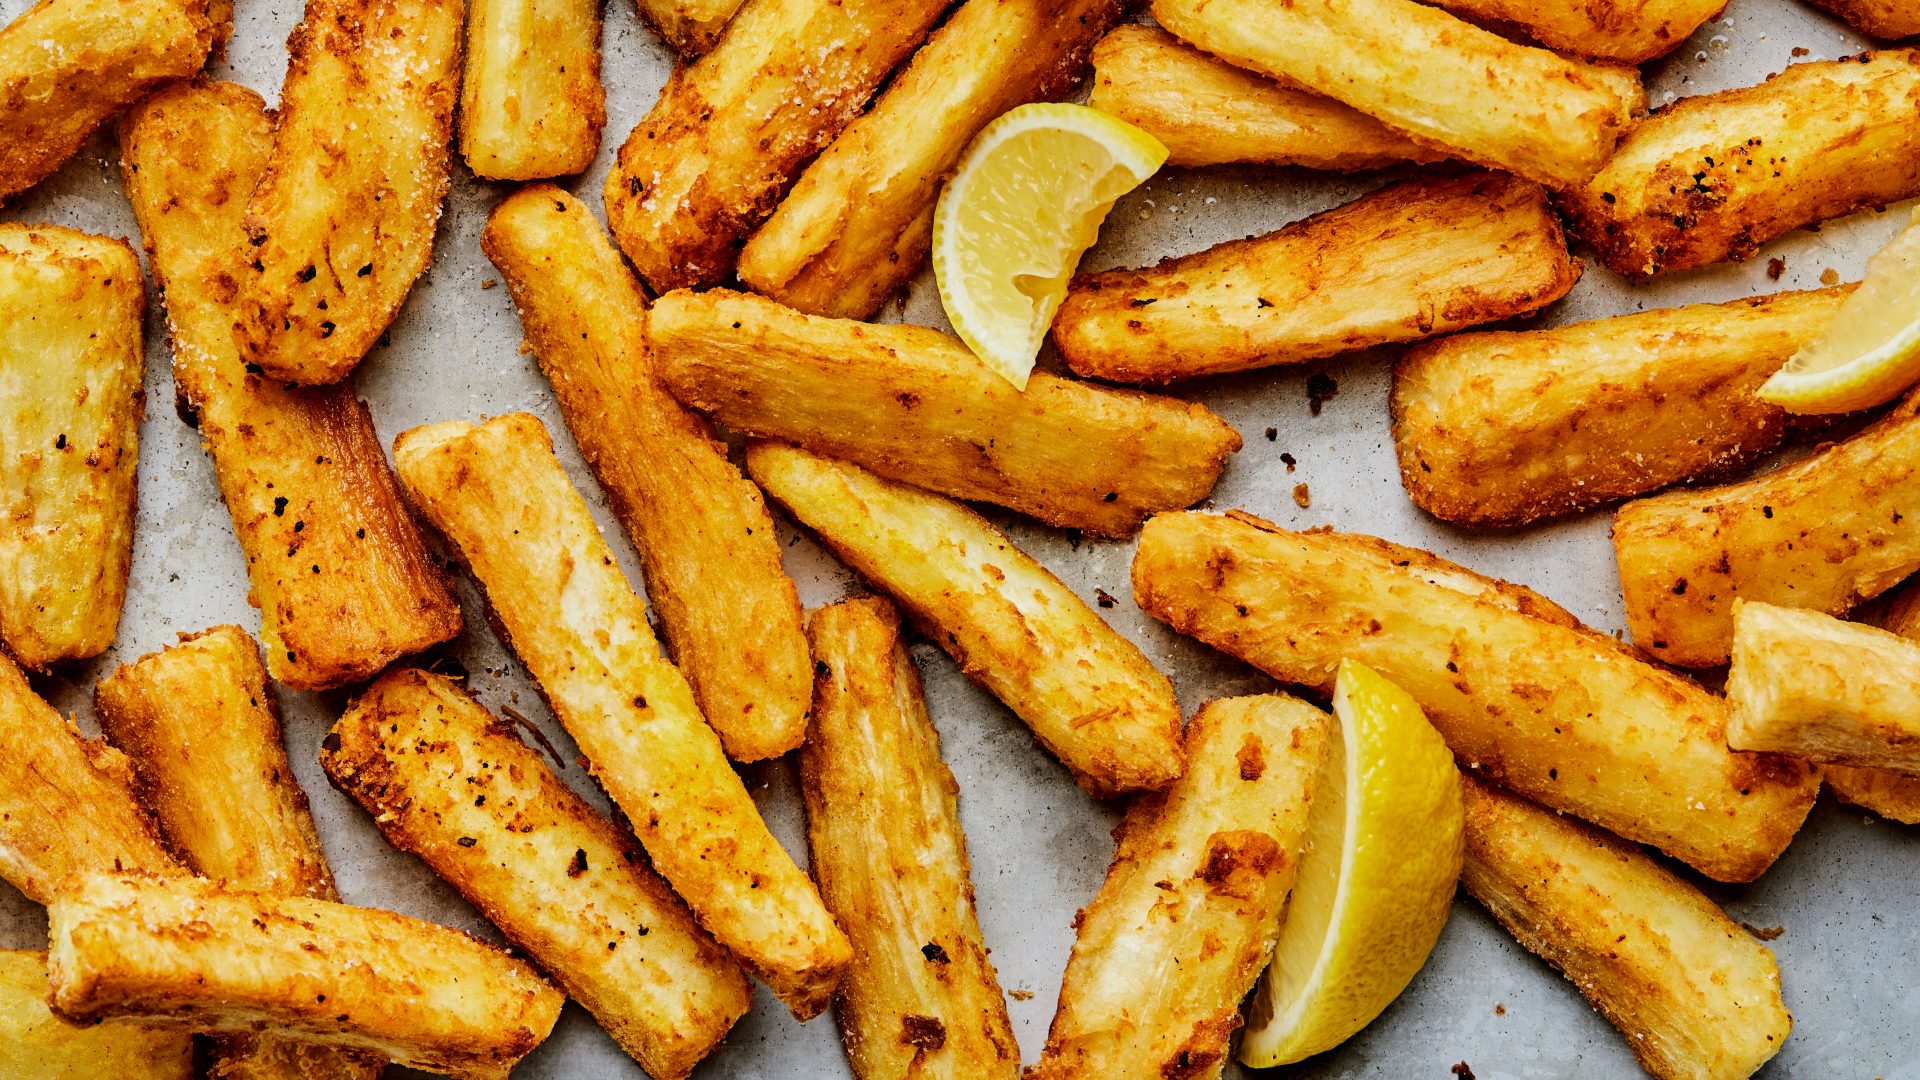 Yuca Fries Are the Crispy-Fluffy Childhood Treat I Continually Crave